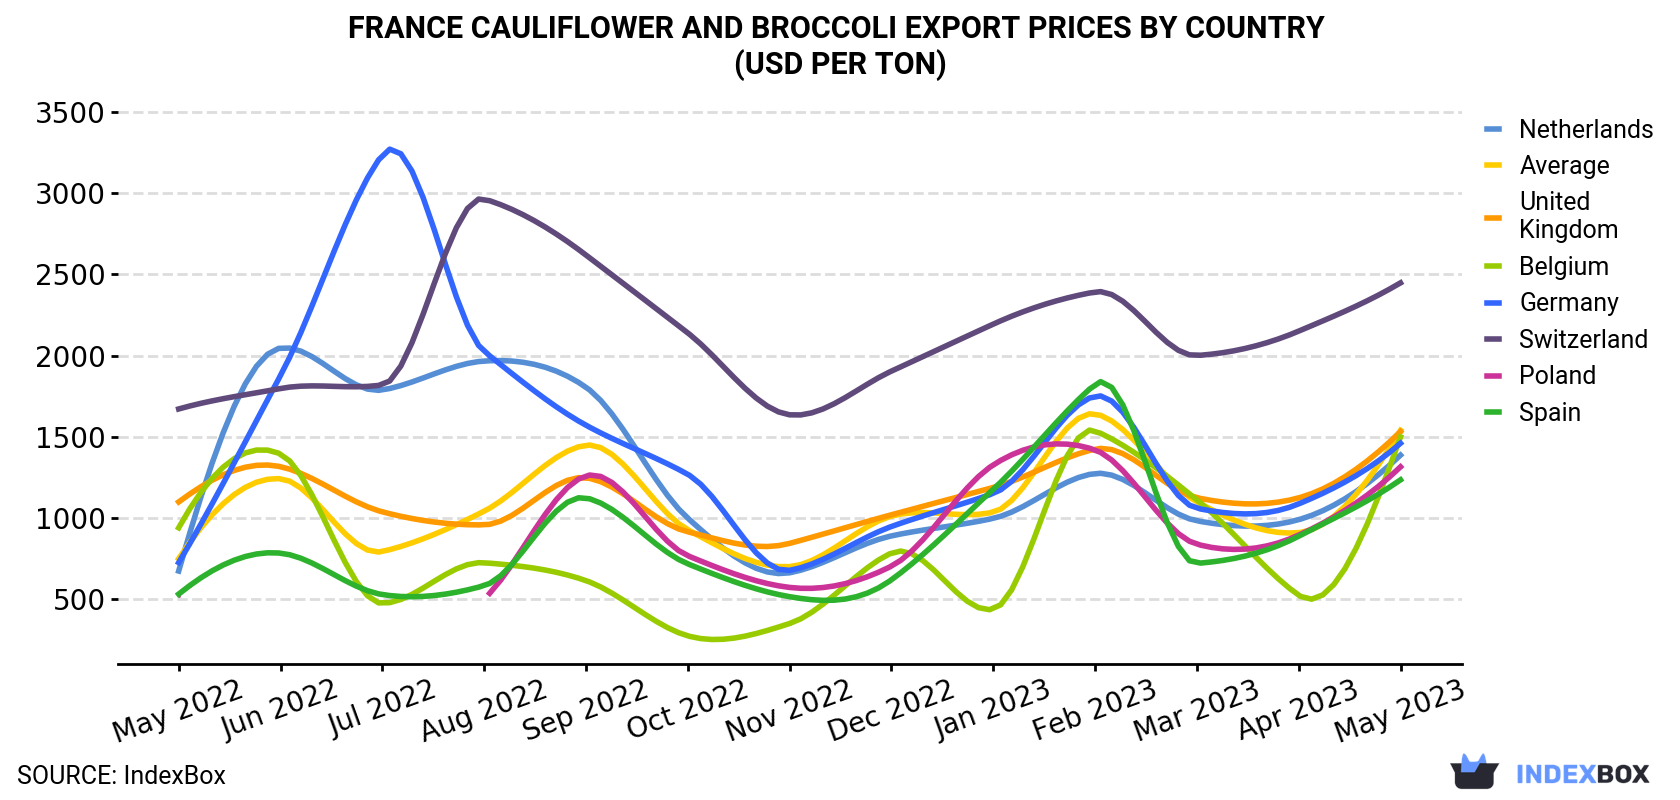 France Cauliflower And Broccoli Export Prices By Country (USD Per Ton)